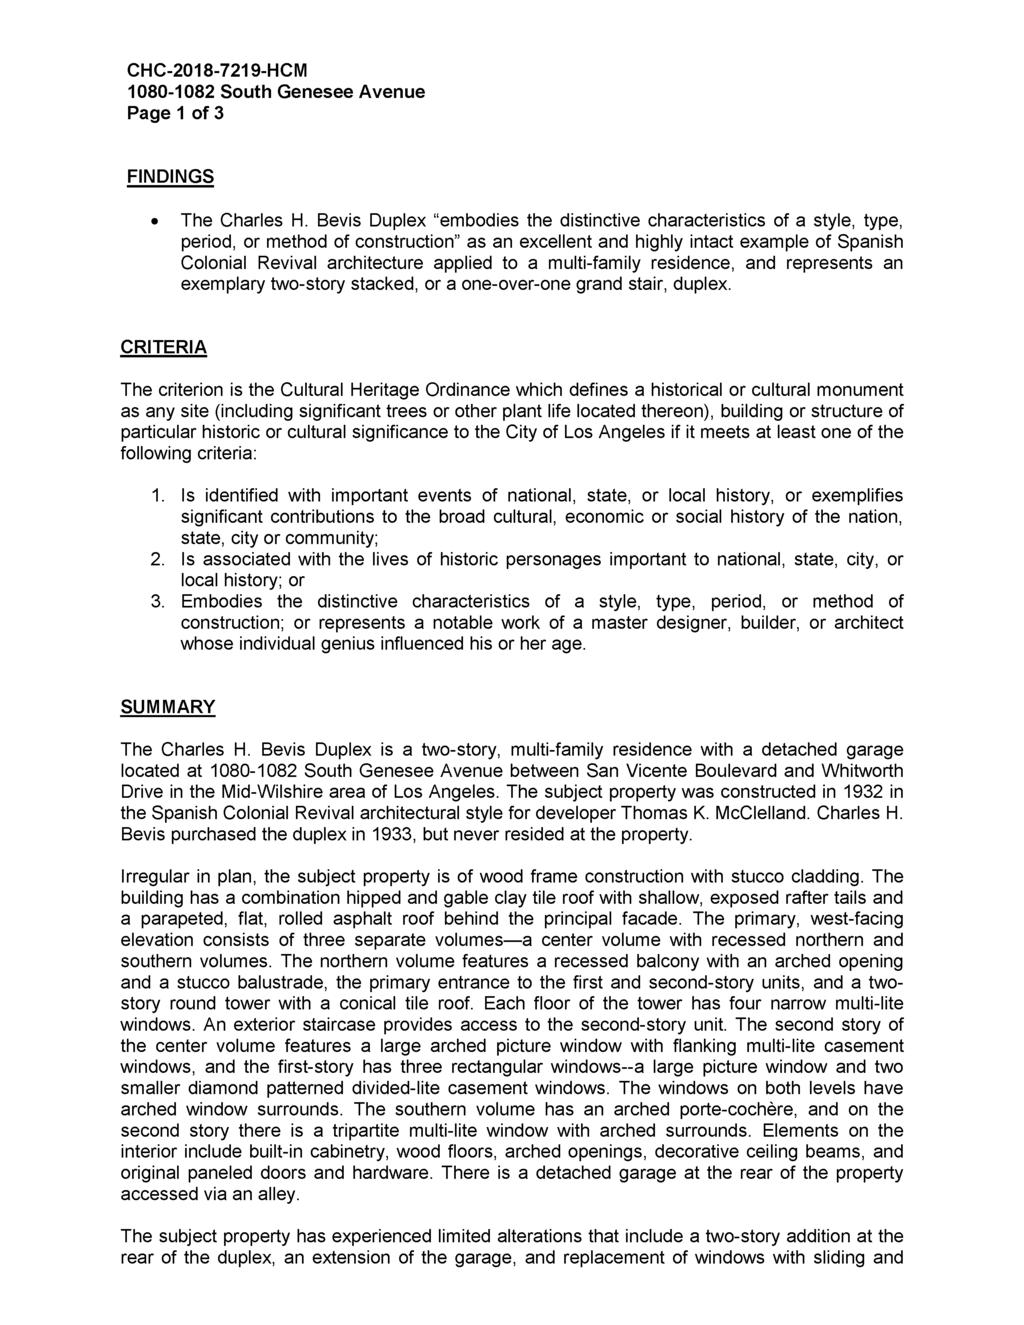 Page 1 of 3 FINDINGS The Charles H.